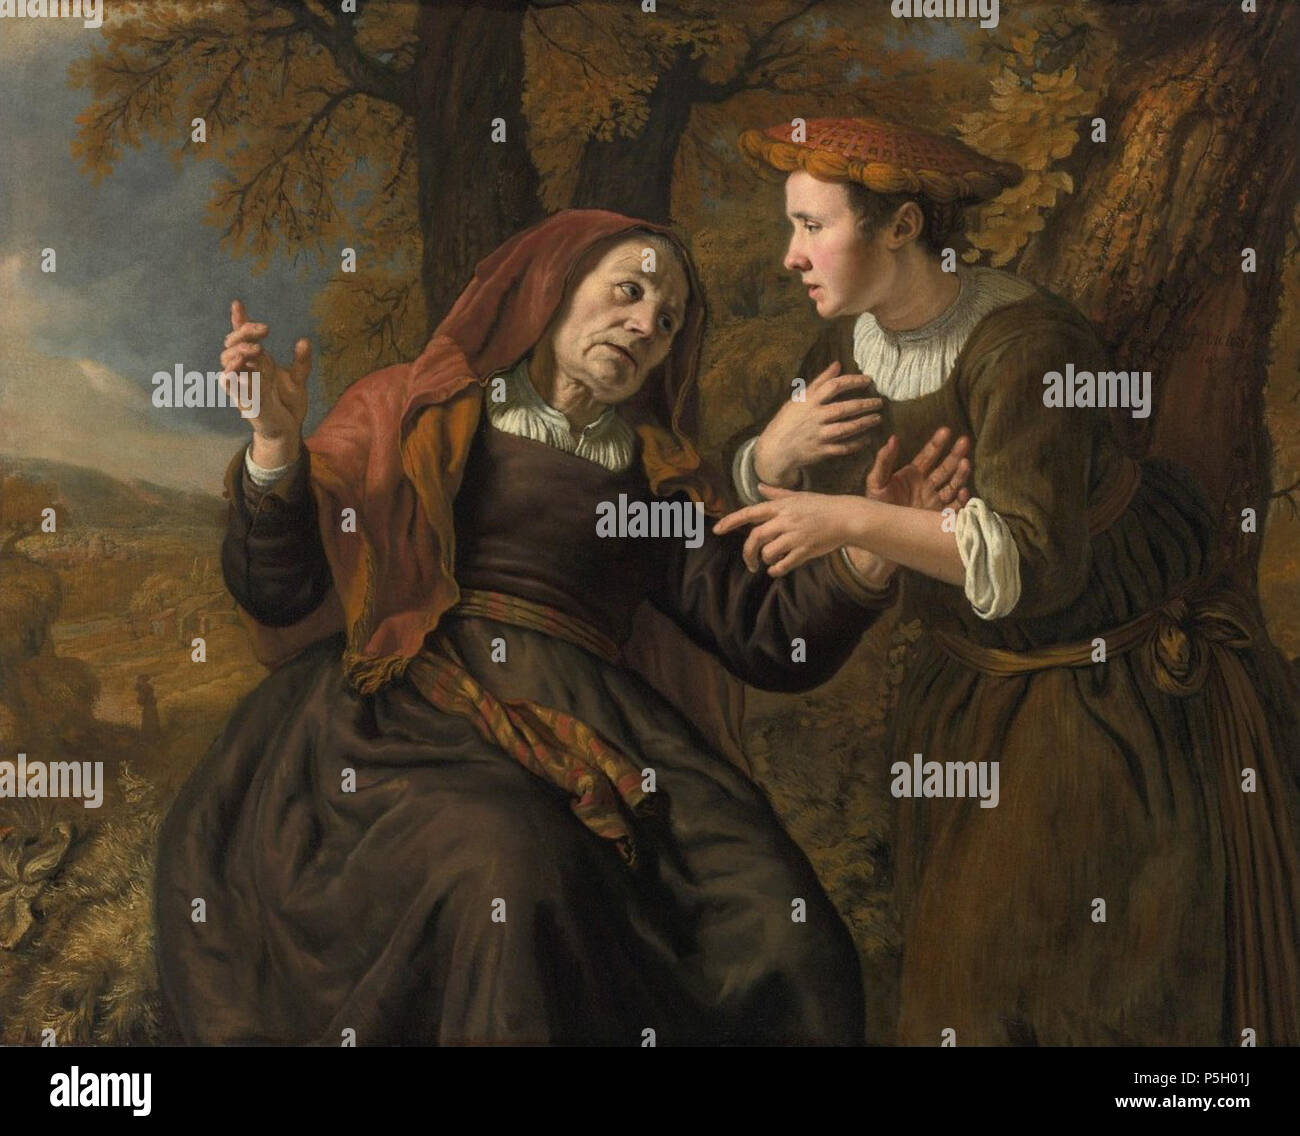 N/A.  English: Ruth and Naomi by Jan Victors, 1653, oil on canvas, 108.6 by 137.2 cm. . 1653.    Jan Victors  (1619–1676)     Alternative names Jan Victoor, Jan Victoors, Jan Victor, Johan Victors, Johannes Victors, Joannes Victers, Johannes Fictor  Description Dutch painter and draughtsman  Date of birth/death 13 June 1619 (baptised) from September 1676 until 1 December 1677 / 1676  Location of birth/death Amsterdam East Indies  Work period between circa 1635 and circa 1672  Work location Amsterdam  Authority control  : Q1357477 VIAF:44176730 ISNI:0000 0001 1631 0669 ULAN:500007951 LCCN:nr930 Stock Photo